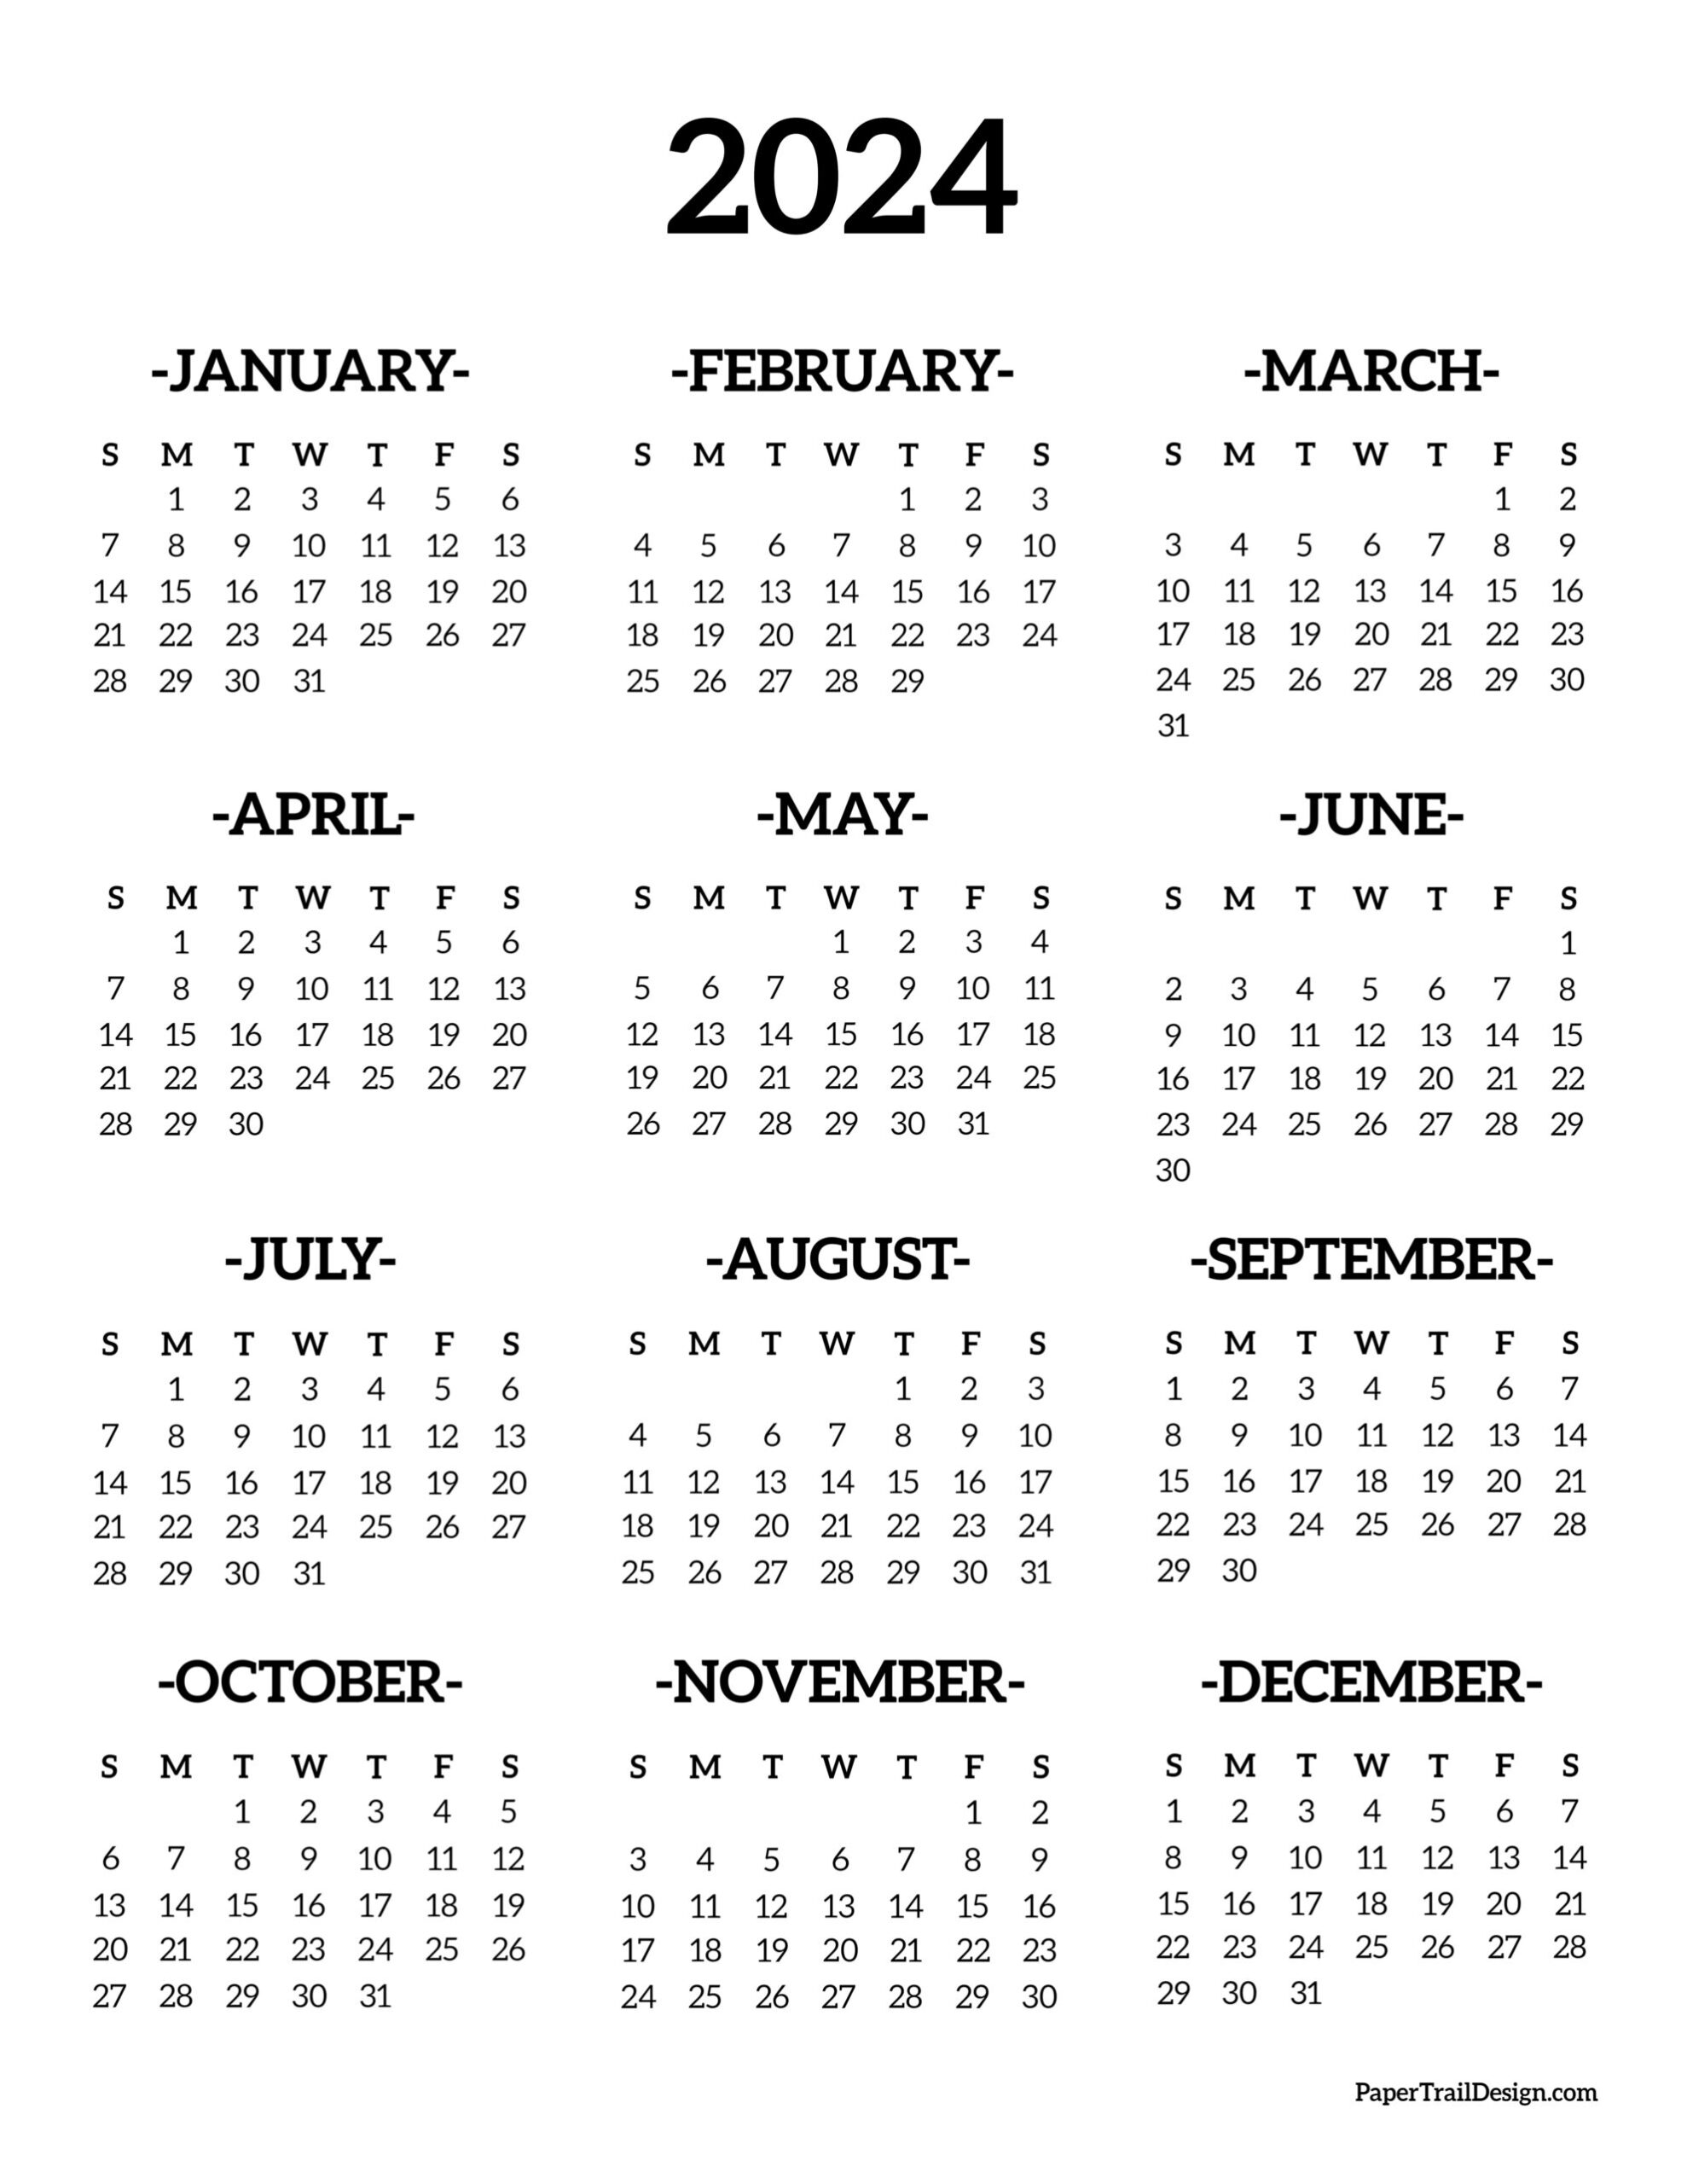 Calendar 2024 Printable One Page - Paper Trail Design for 2024 At A Glance Calendar Printable